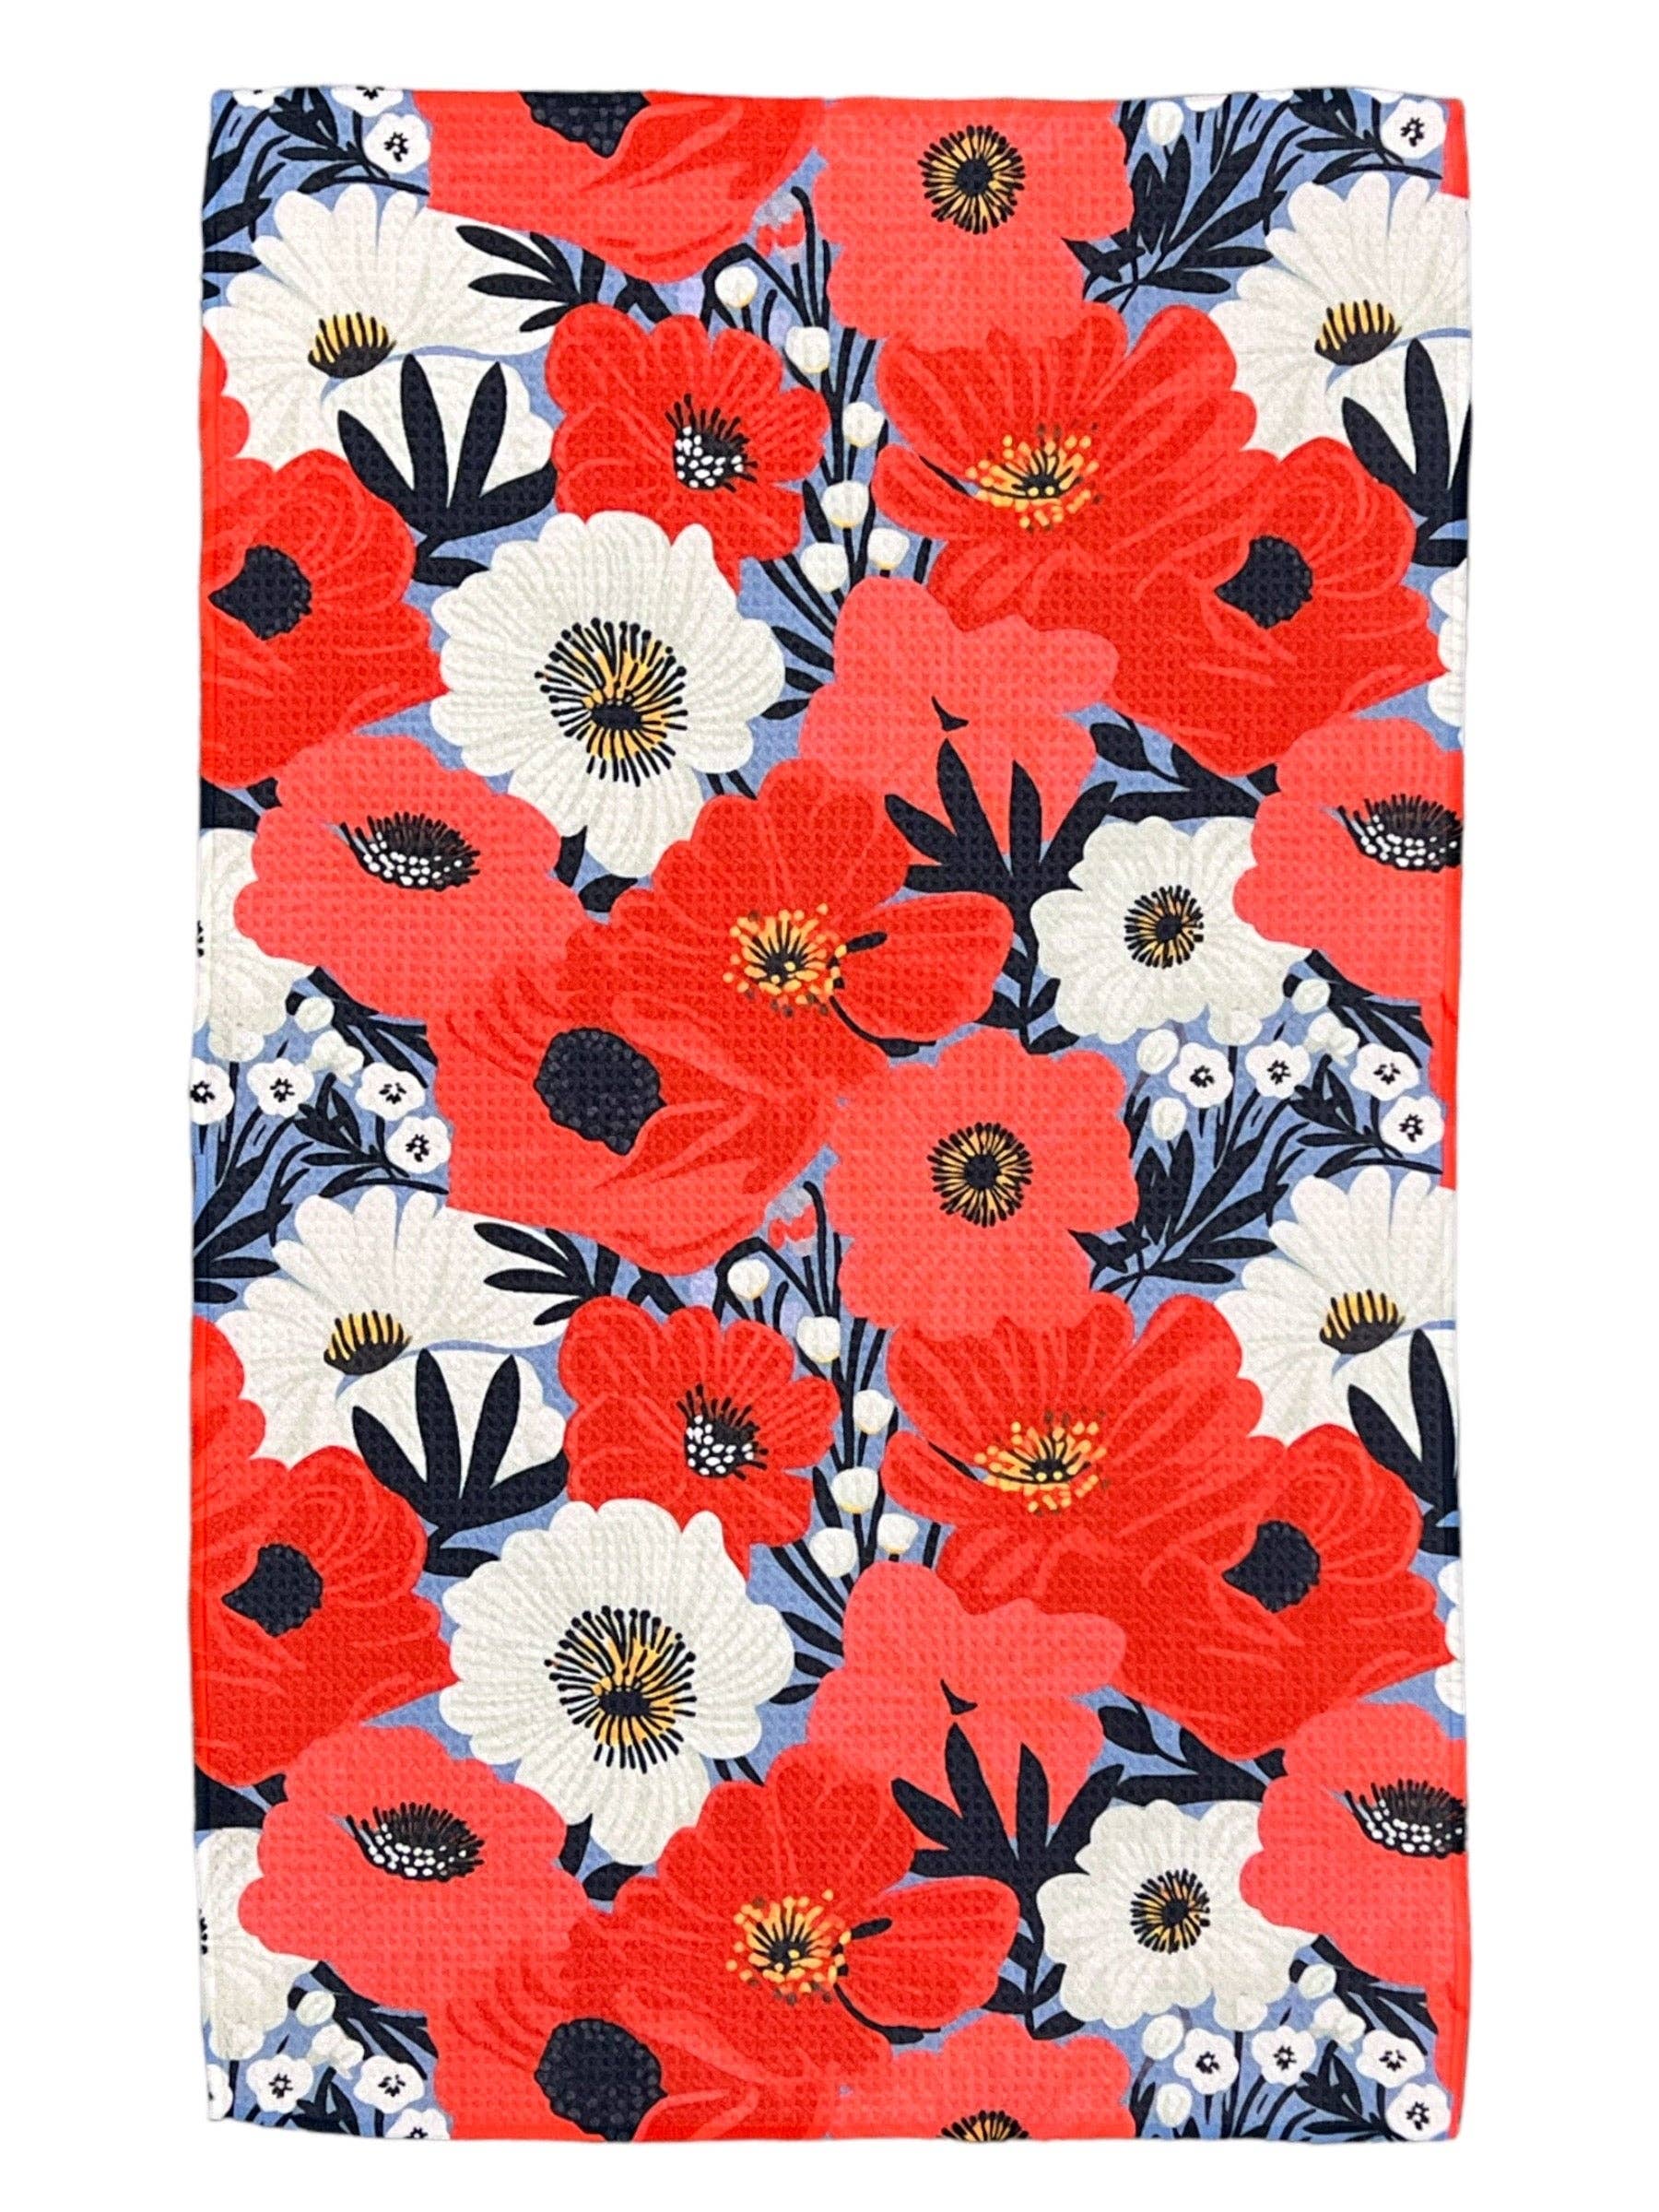 Floral of the 4th: Single Sided Hand Towel